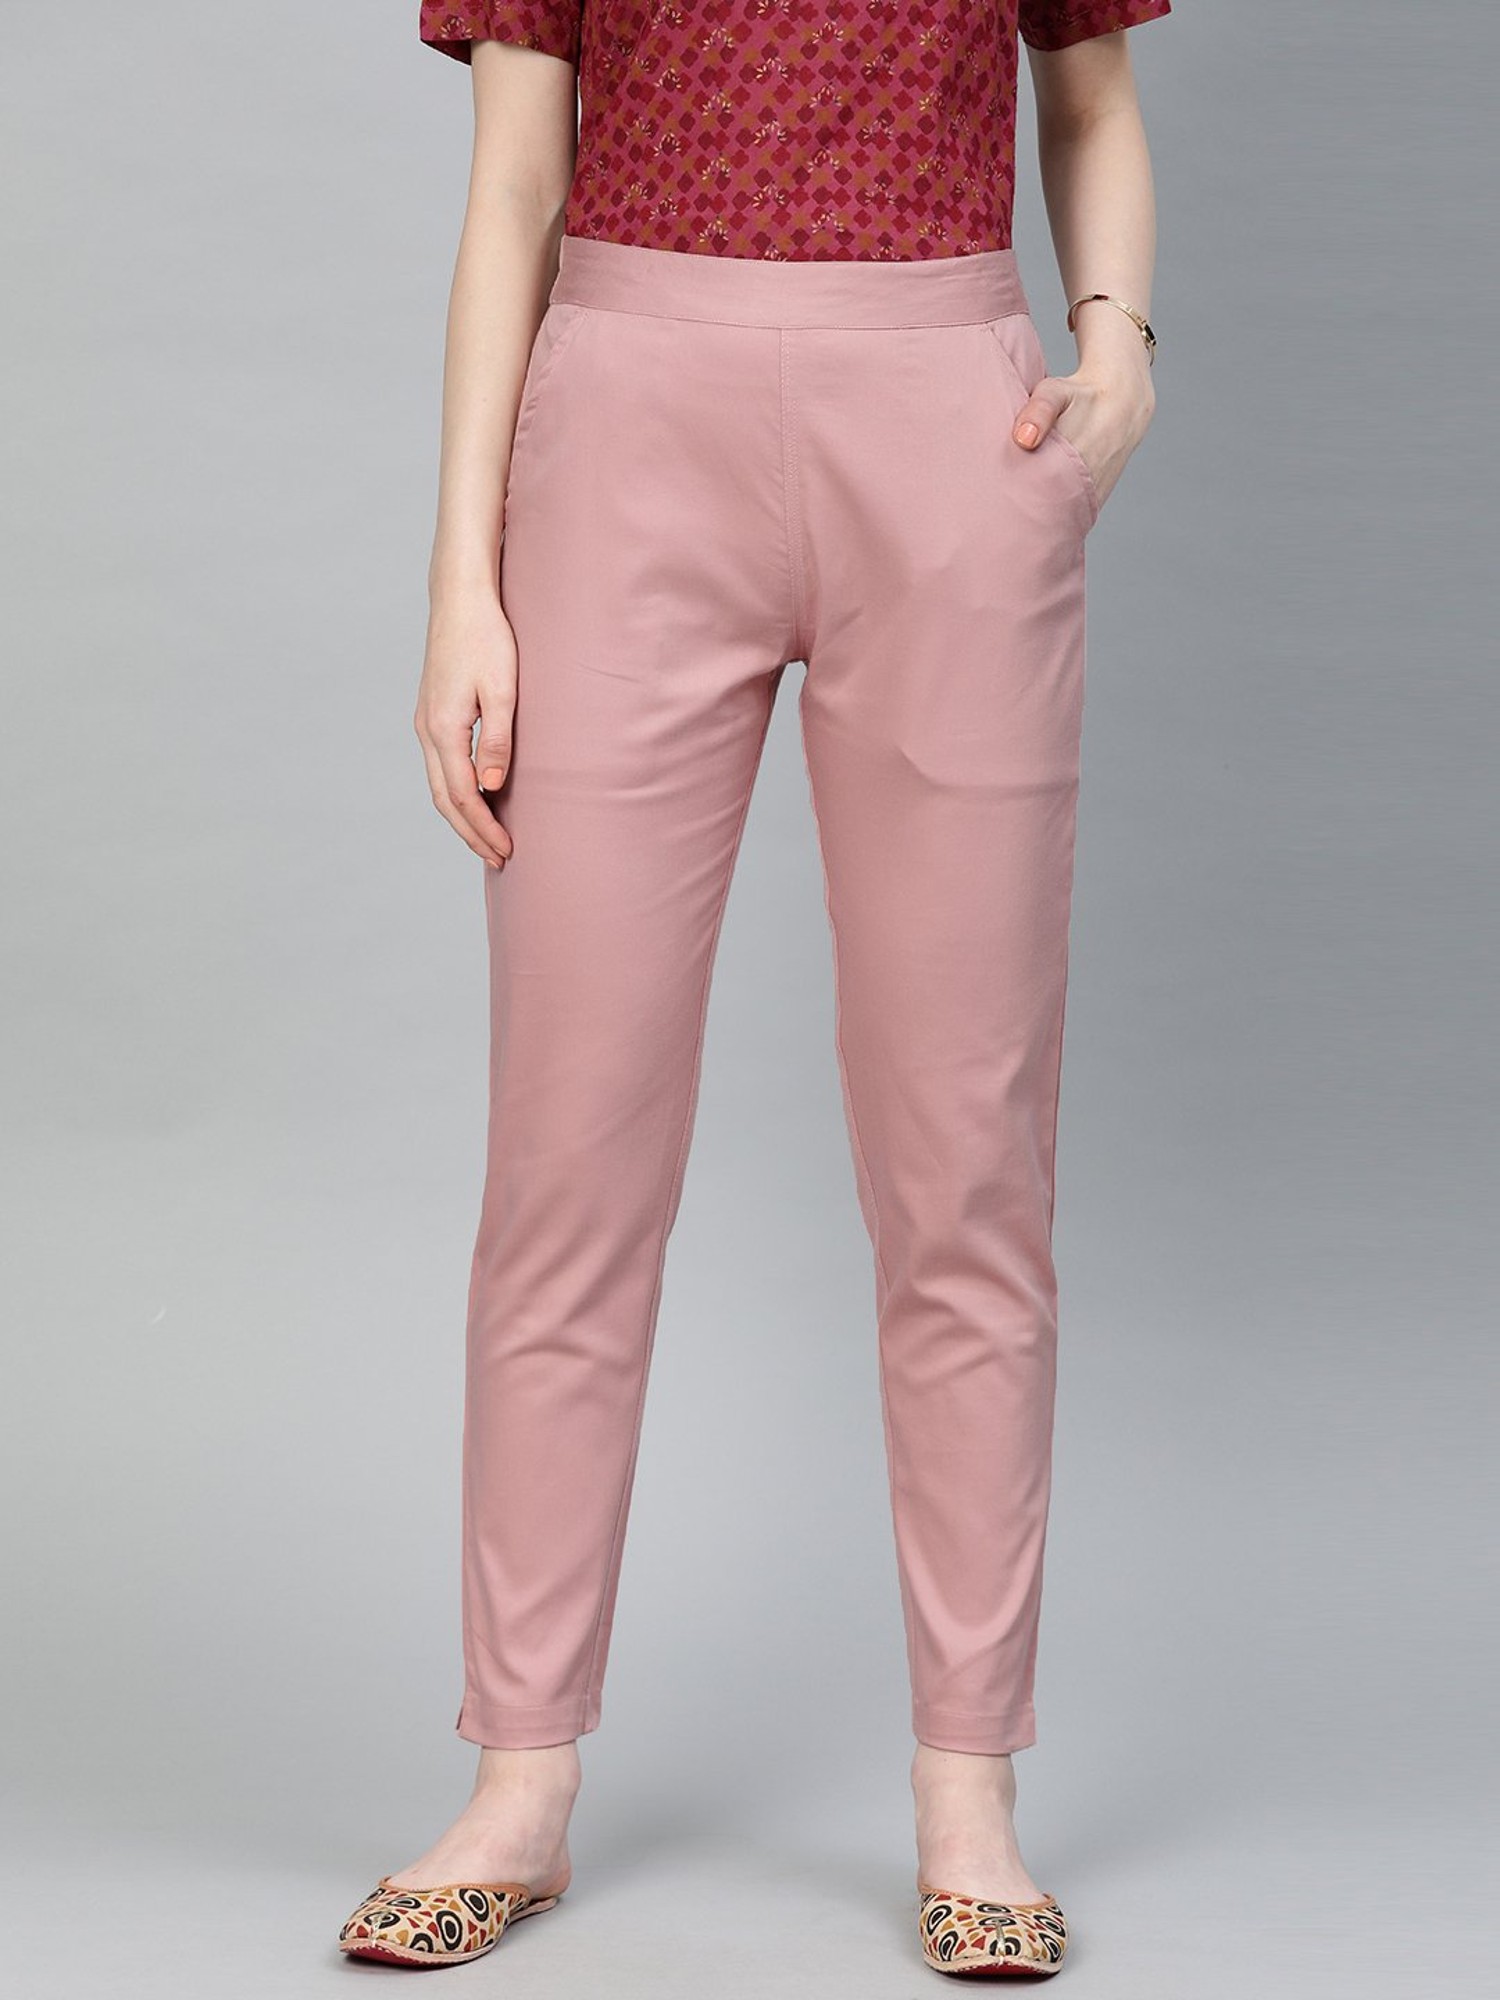 monday musing colored pants  Pink pants outfit Fashion Work outfit